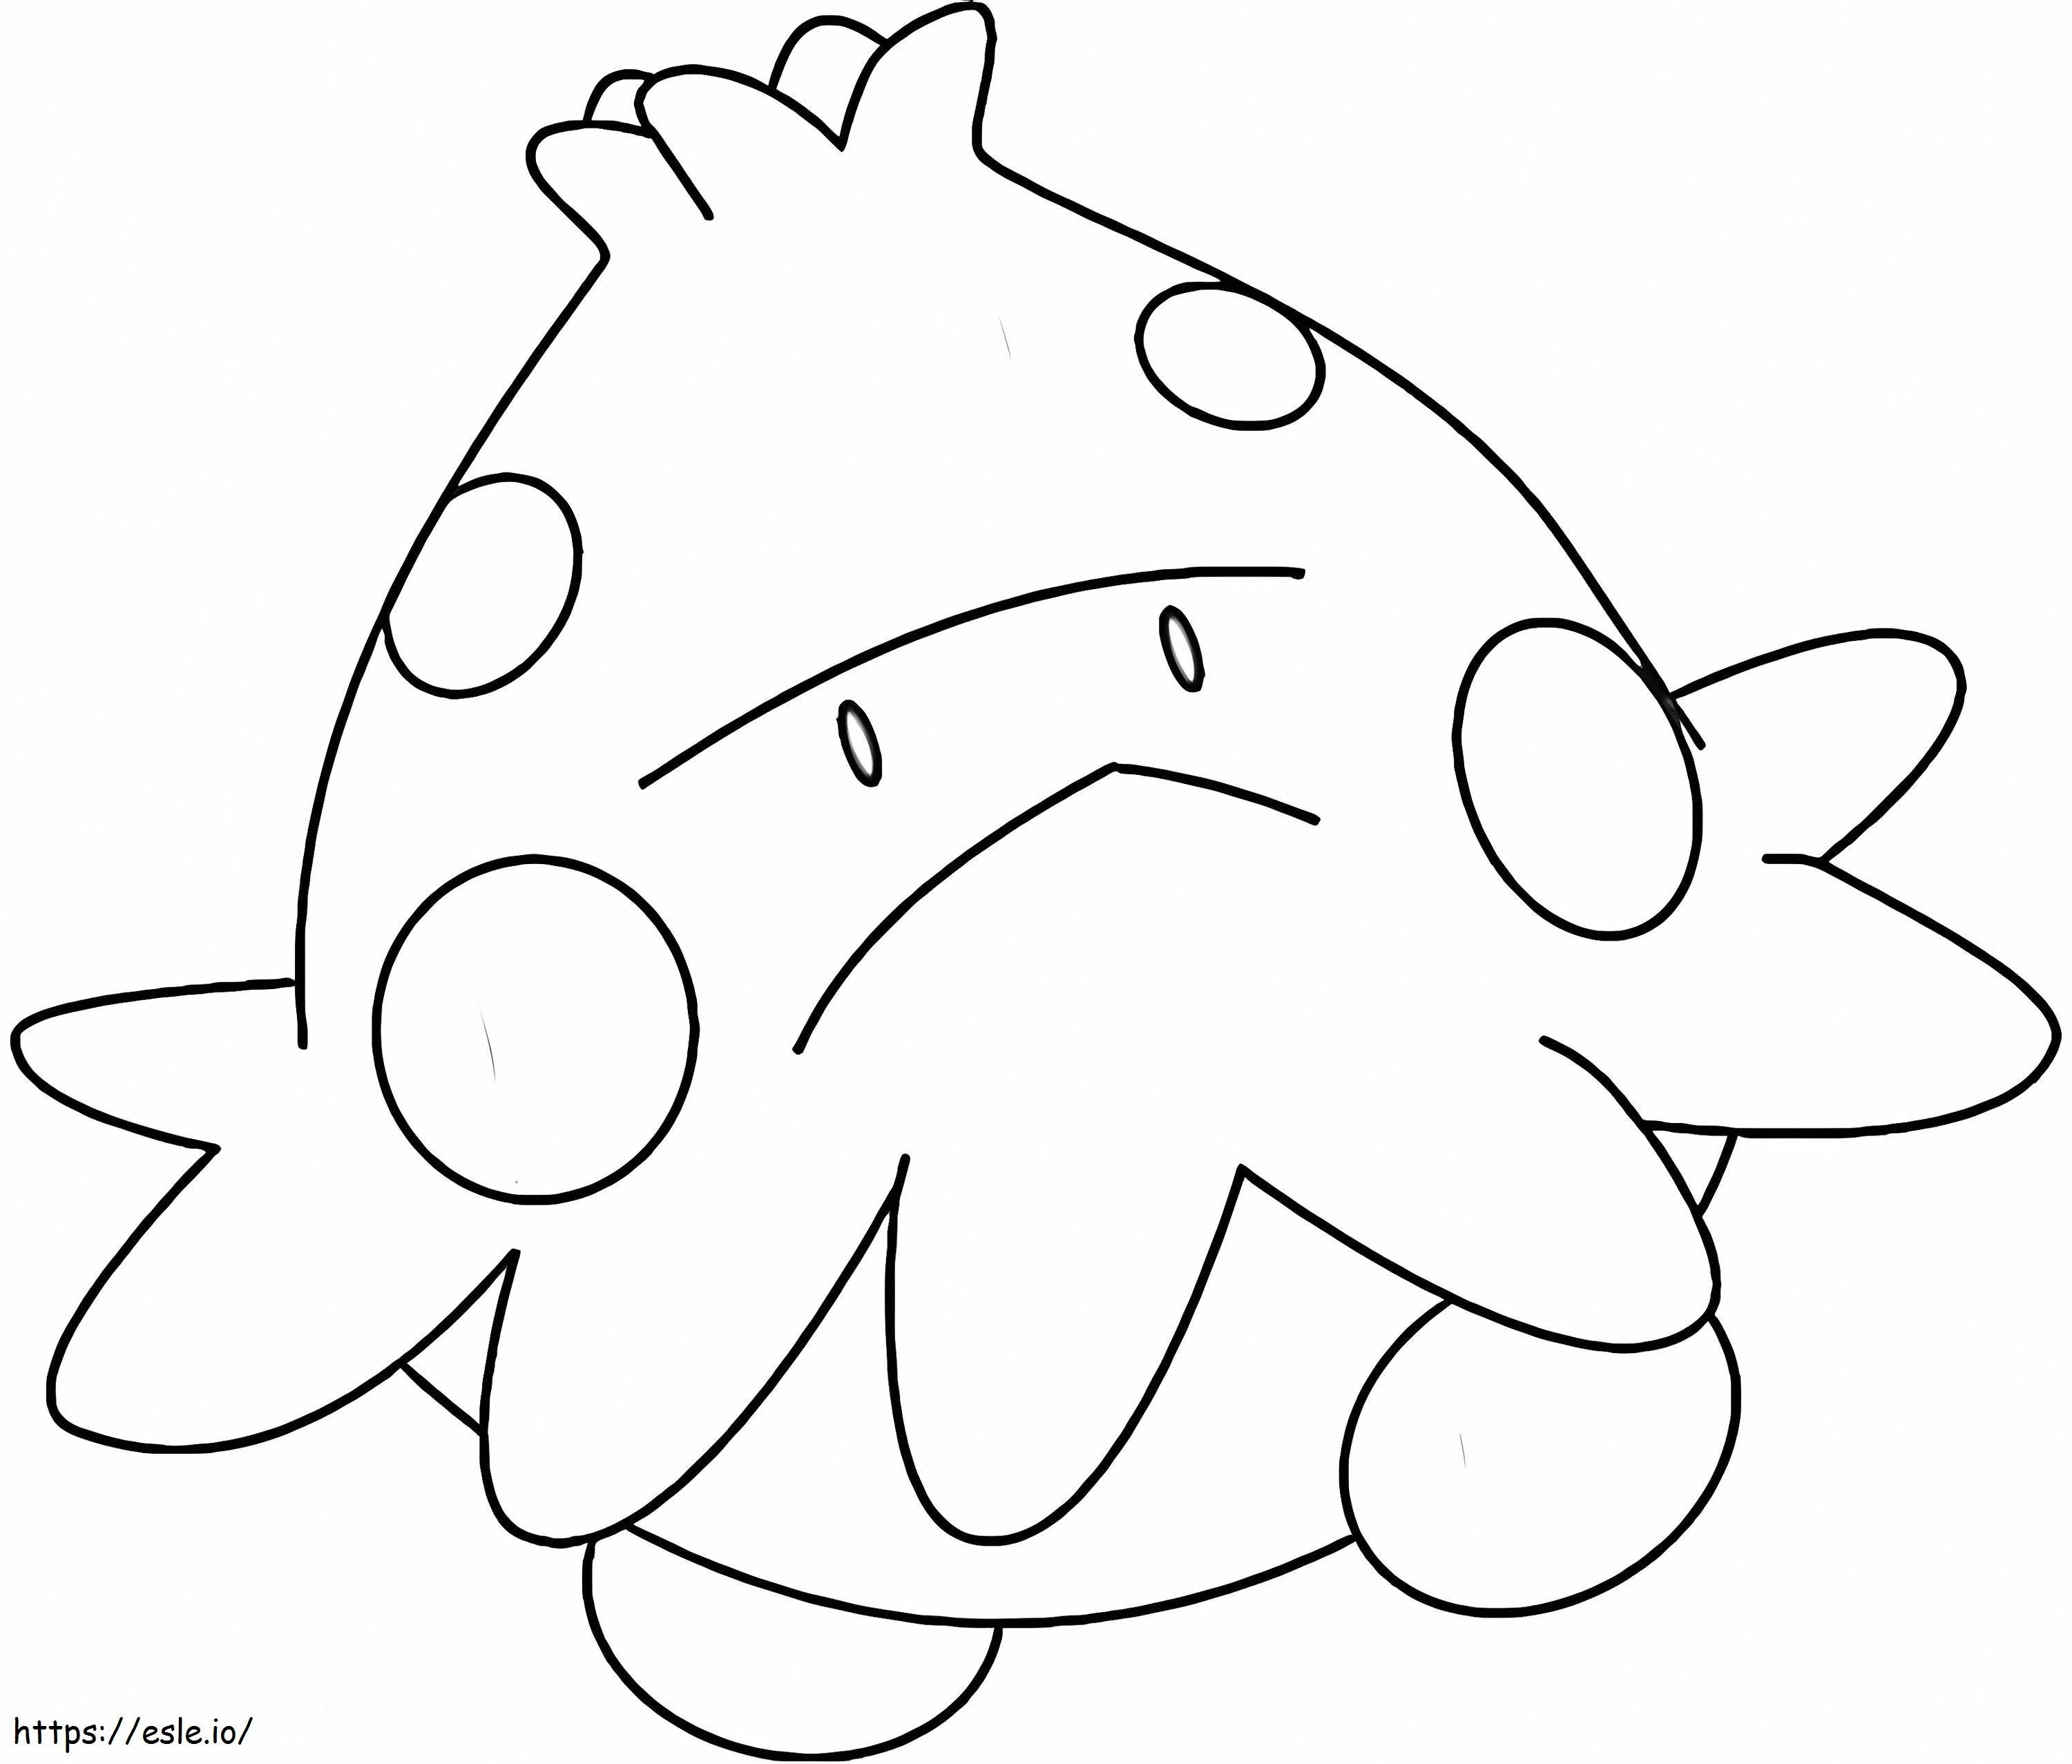 Shroomish Pokemon 1 coloring page